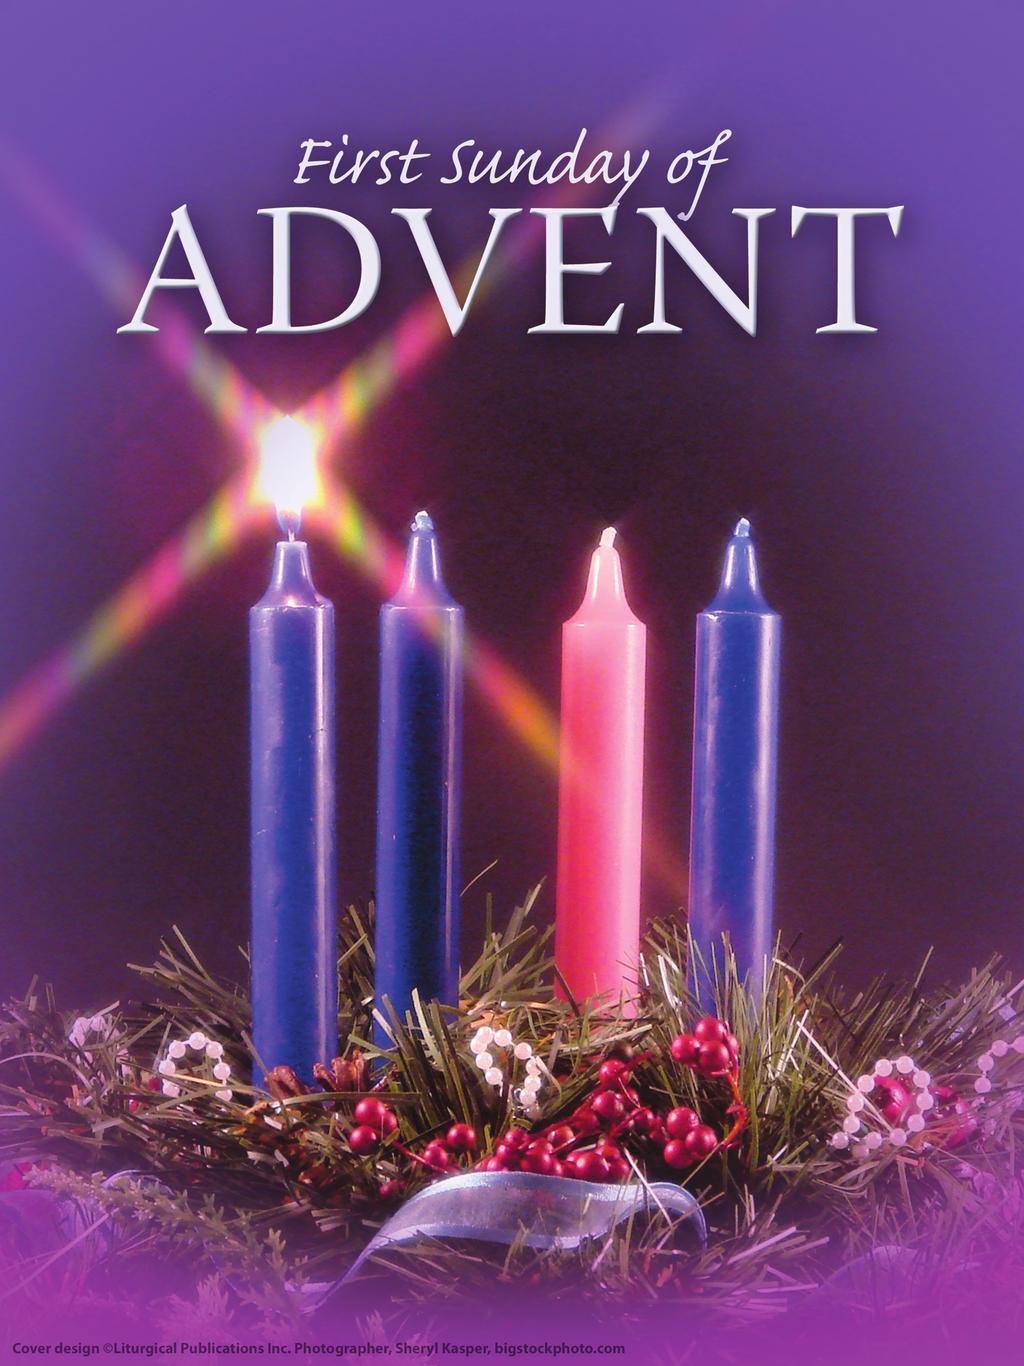 November 27, 2016 - First Sunday of Advent ST.